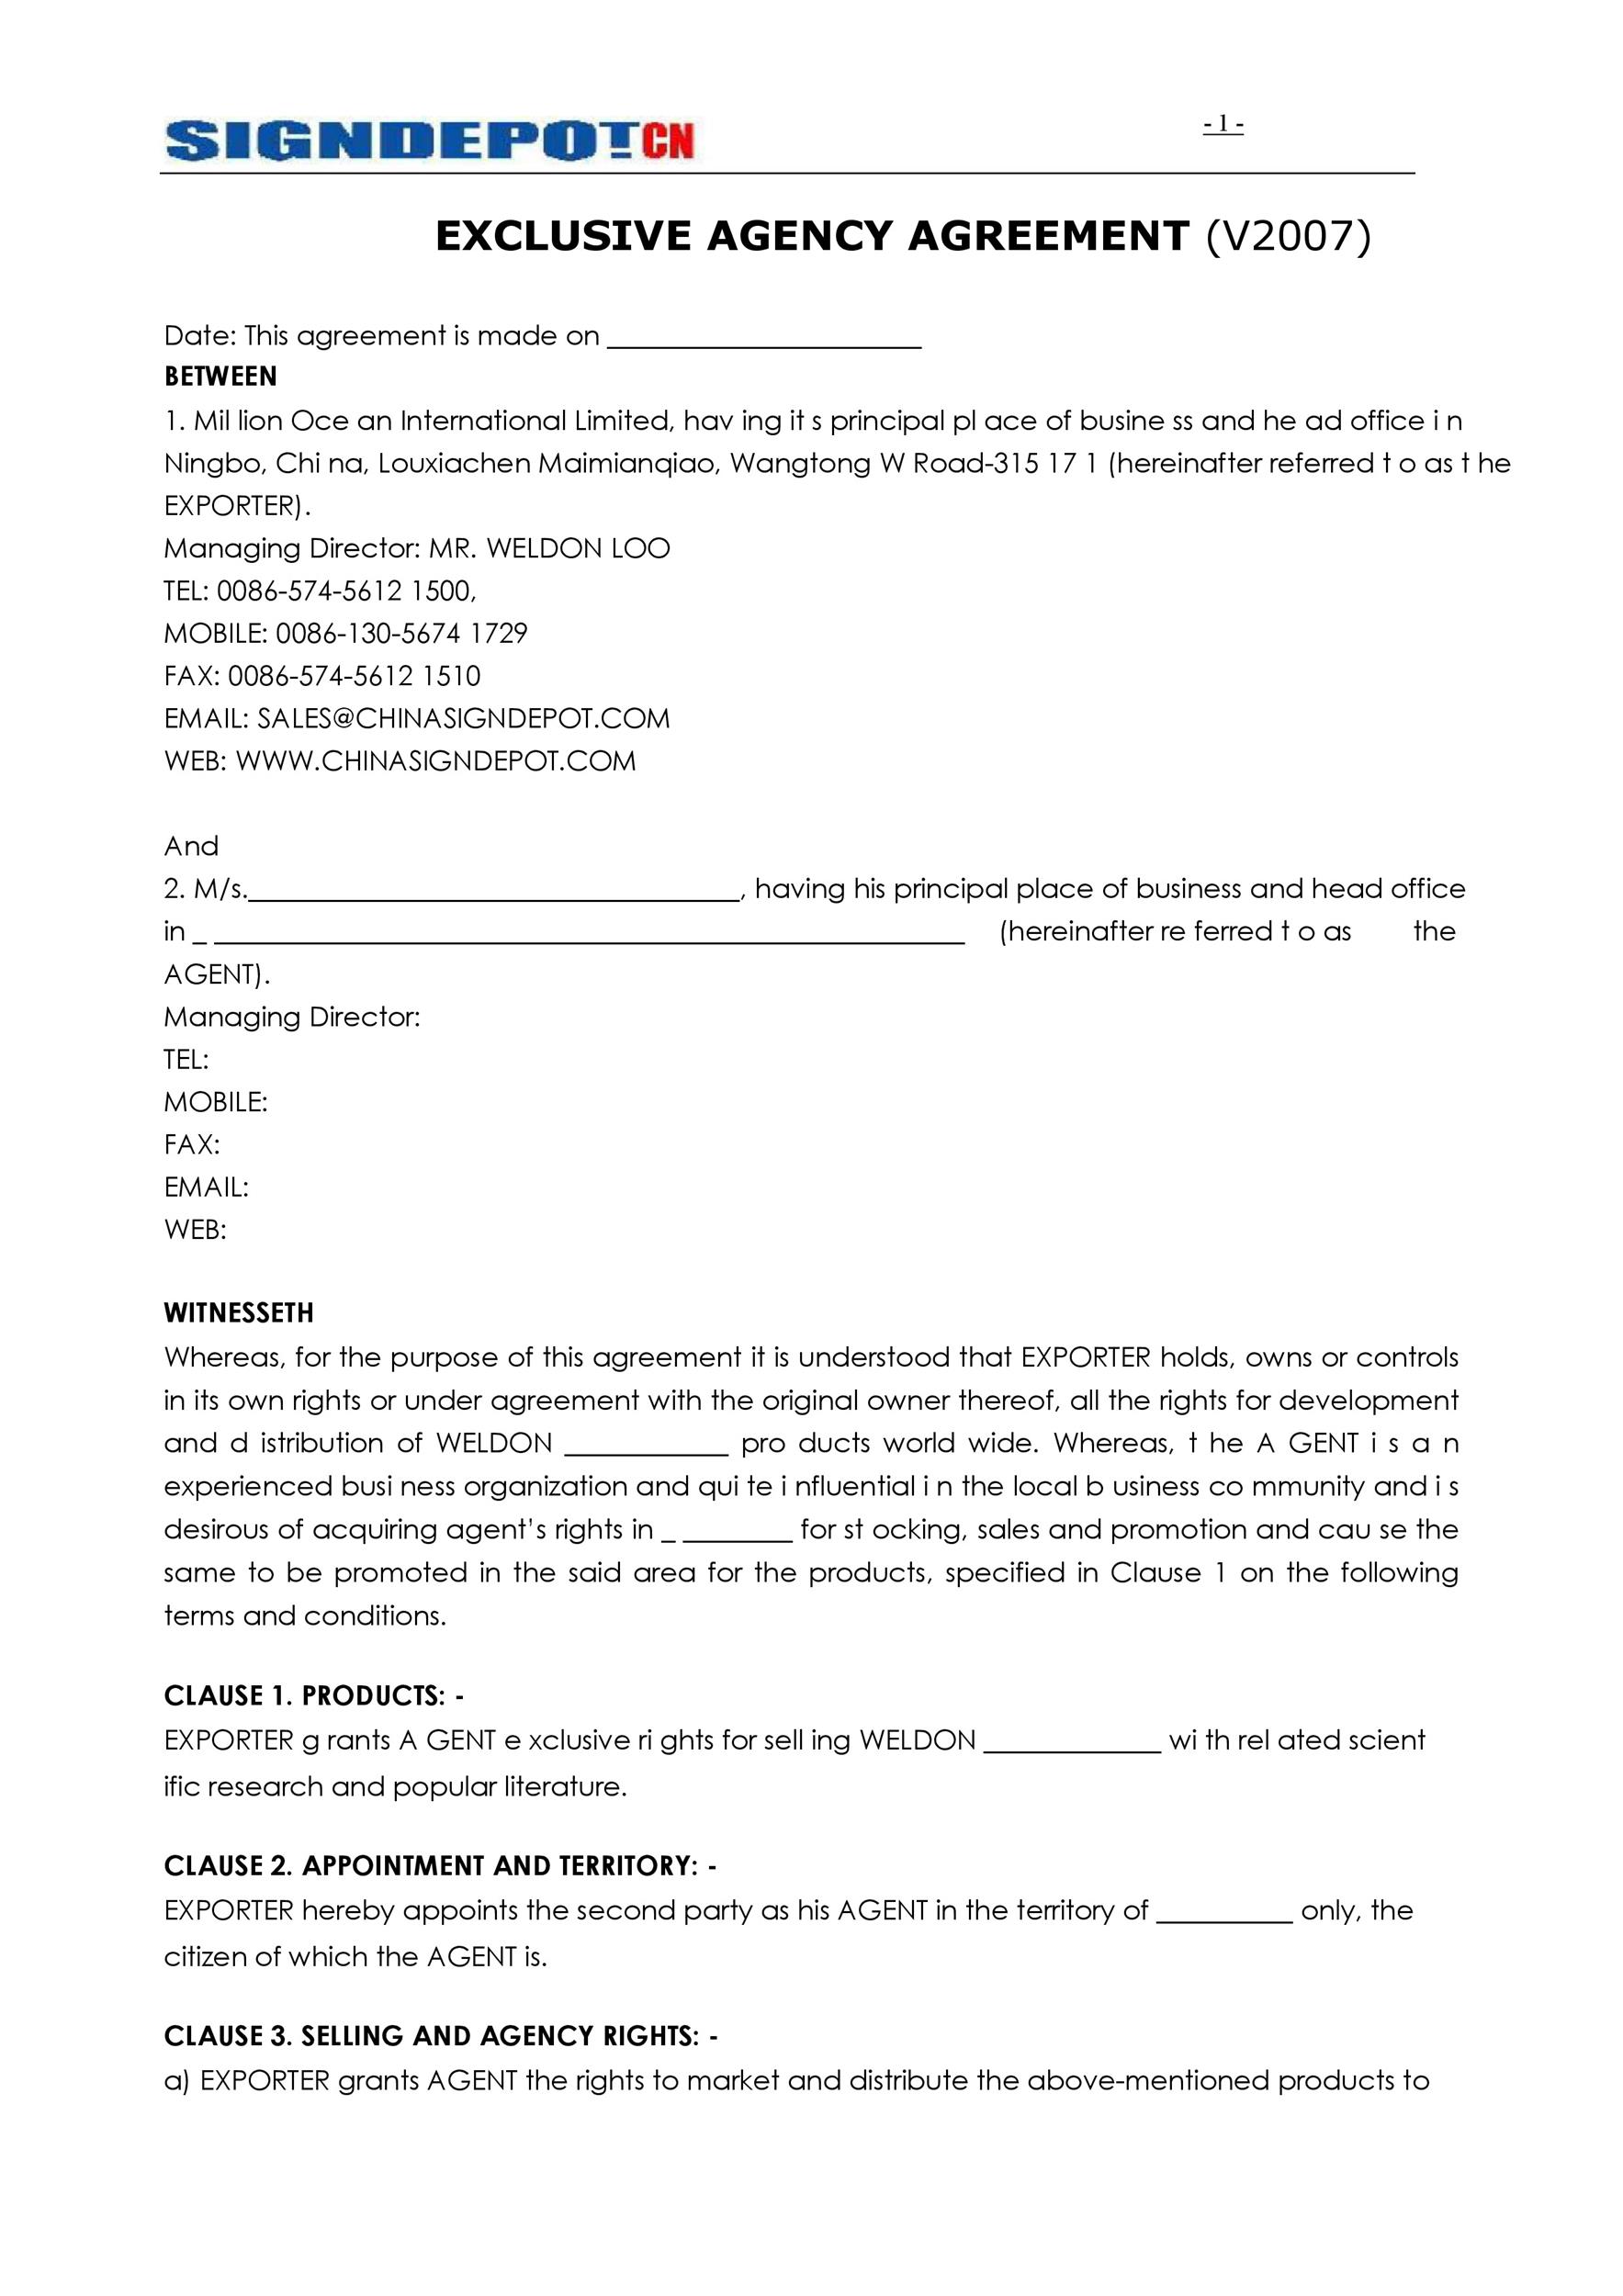 50 Free Agency Agreement Templates (MS Word) ᐅ TemplateLab